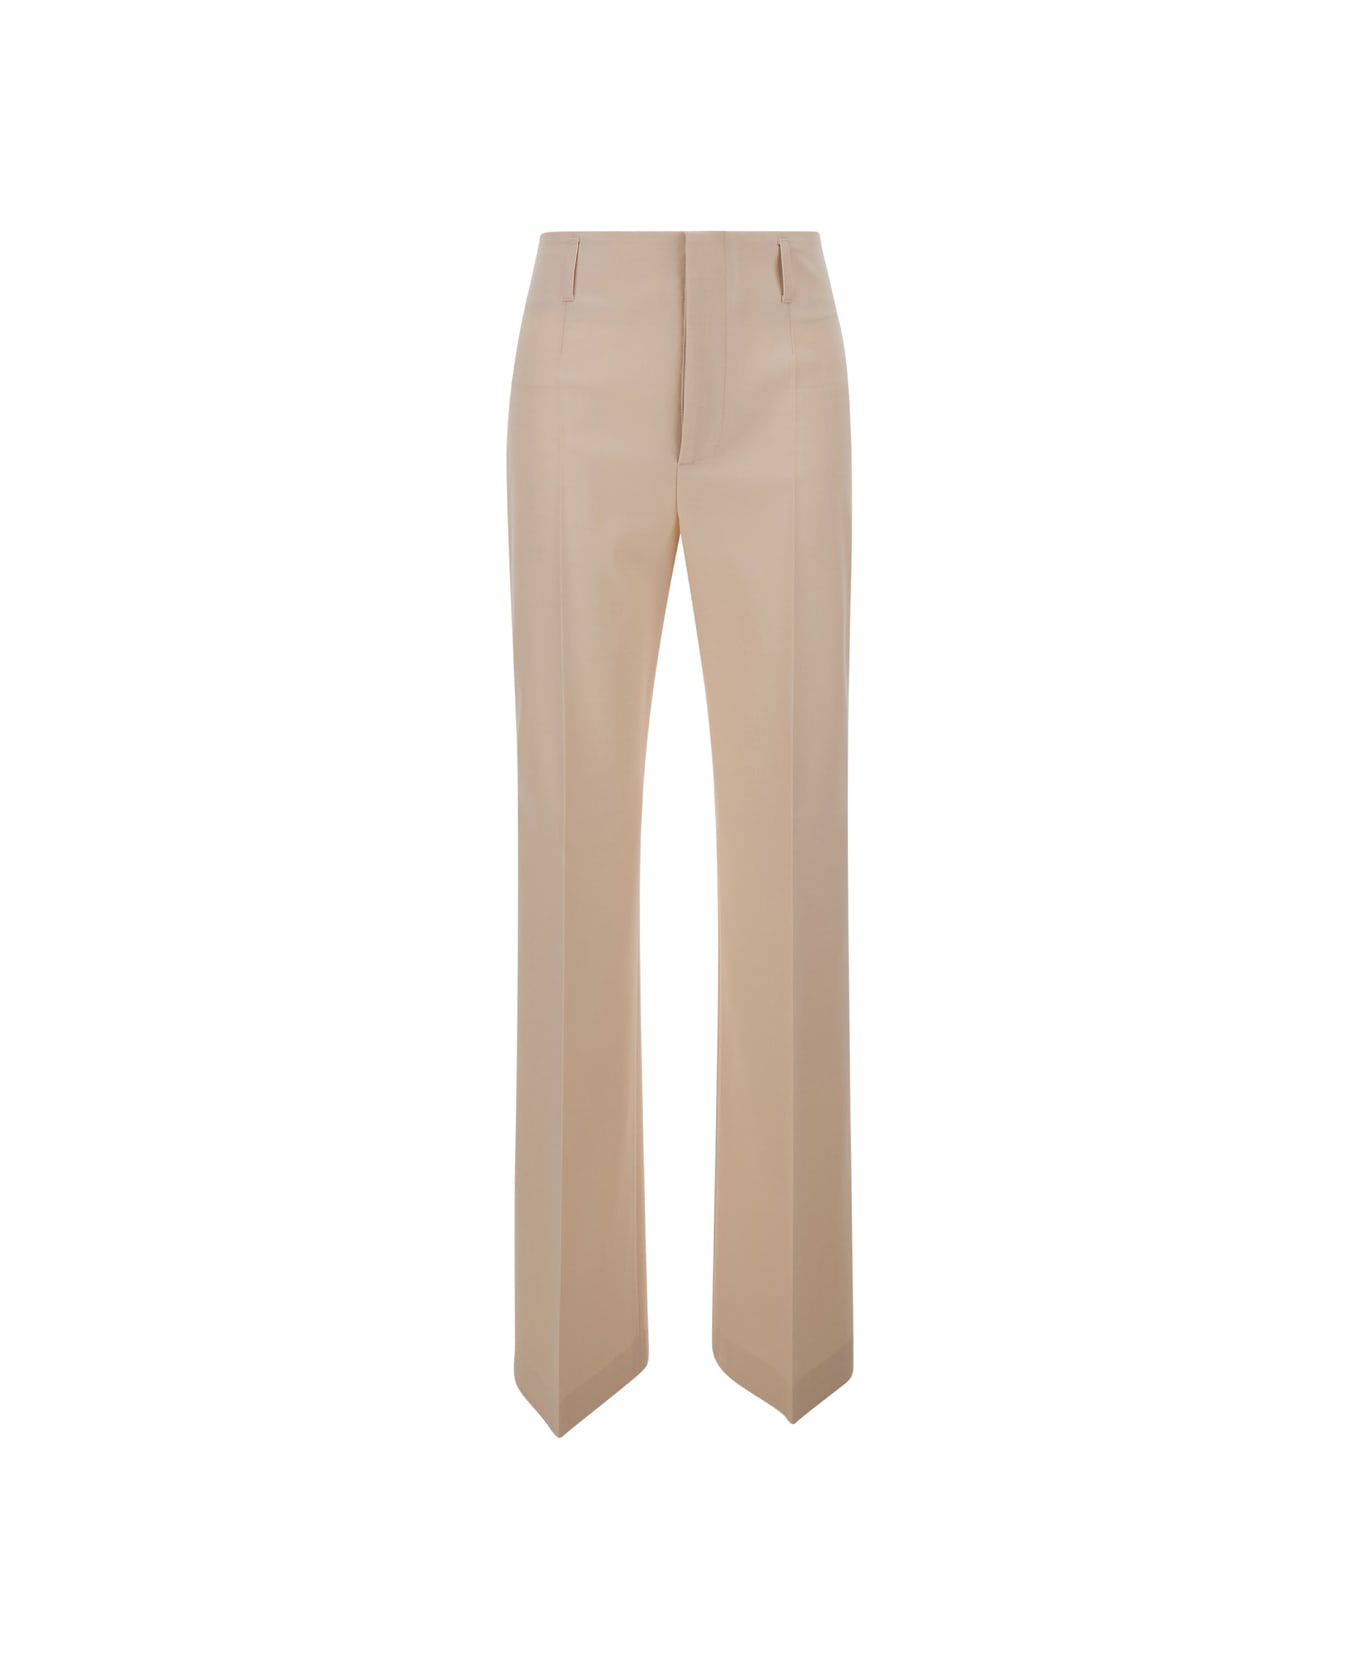 Philosophy di Lorenzo Serafini Ivory White High Waisted Tailored Trousers In Technical Fabric Woman - Beige ボトムス